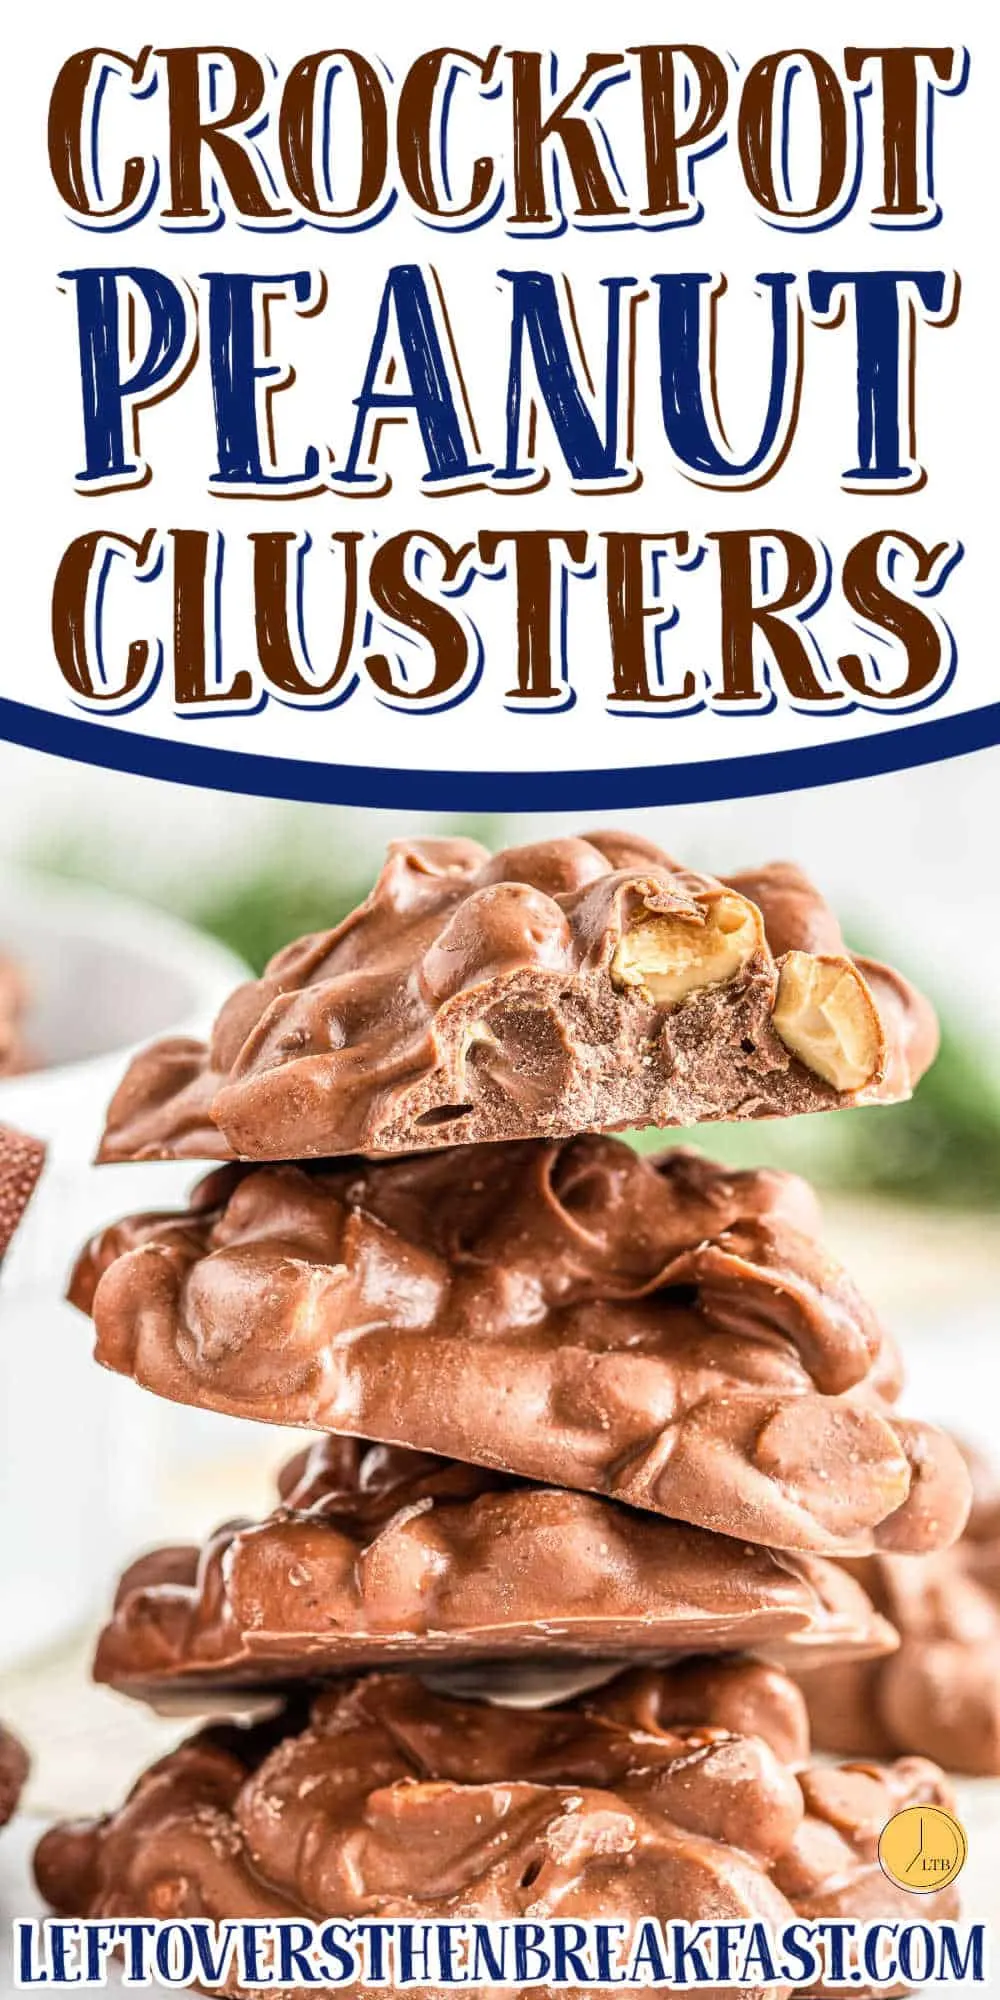 stack of crockpot peanut clusters with text "crockpot peanut clusters"